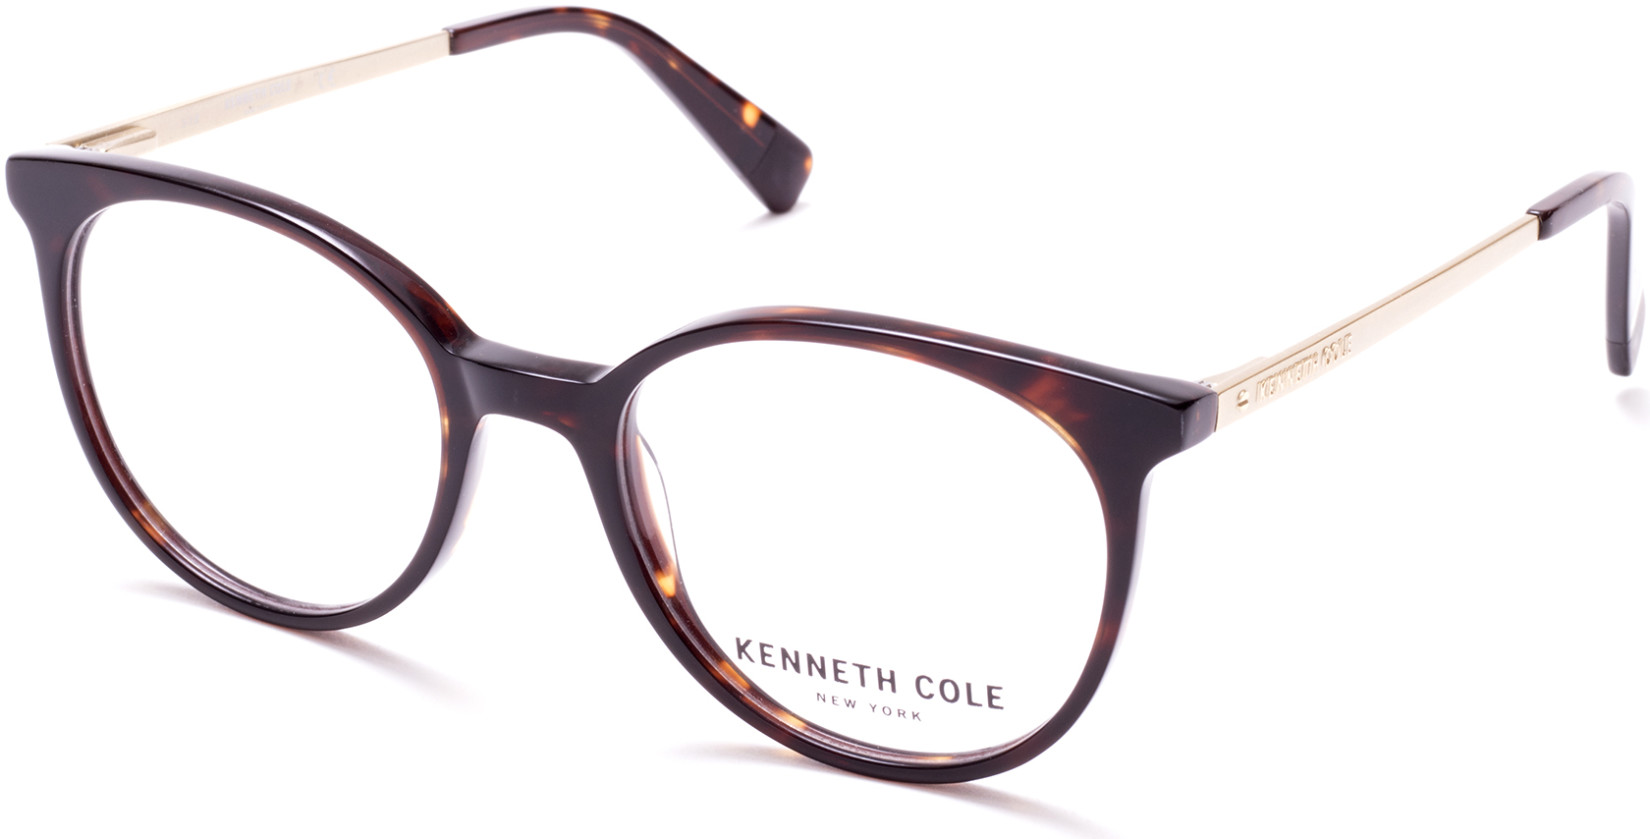 KENNETH COLE NY 0288 052